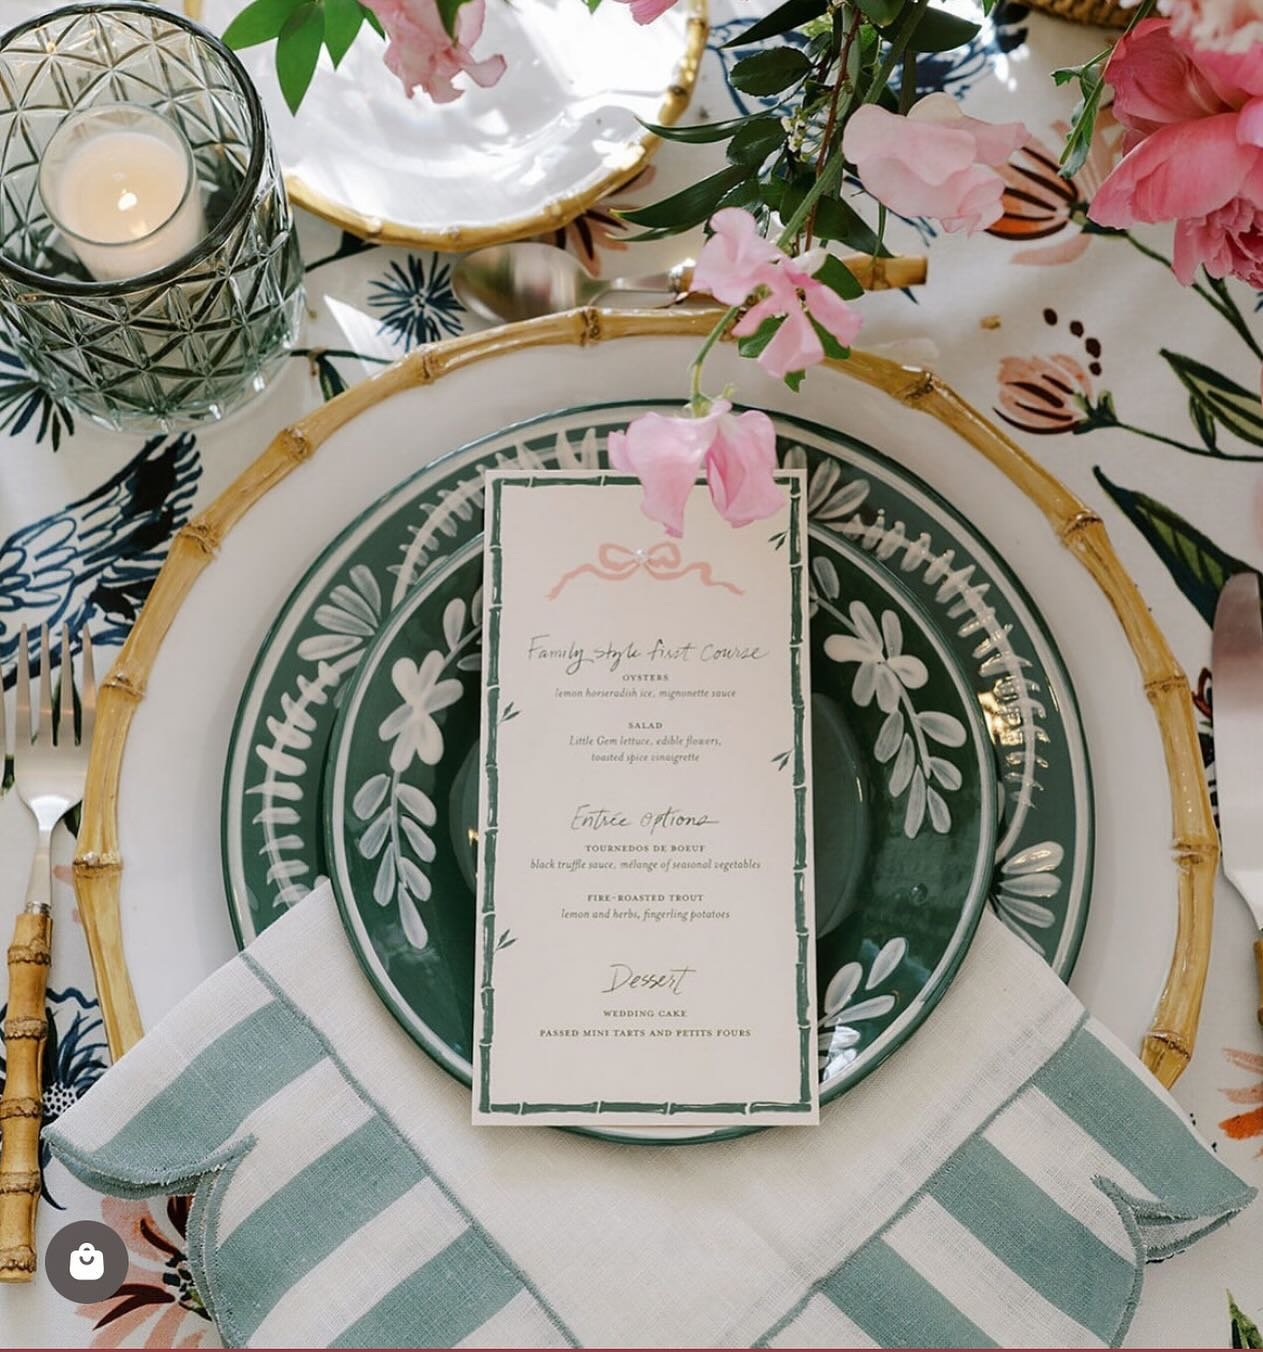 Thank you @overthemoon for sharing:

Tabletop Tuesday: A Rhode Island Summer Wedding Reception 💚🌸🍽️🌊 &ldquo;The aesthetic is influenced by the grandmillennial style, with twists of traditional and modern maximalist patterns and vibes,&rdquo; plan